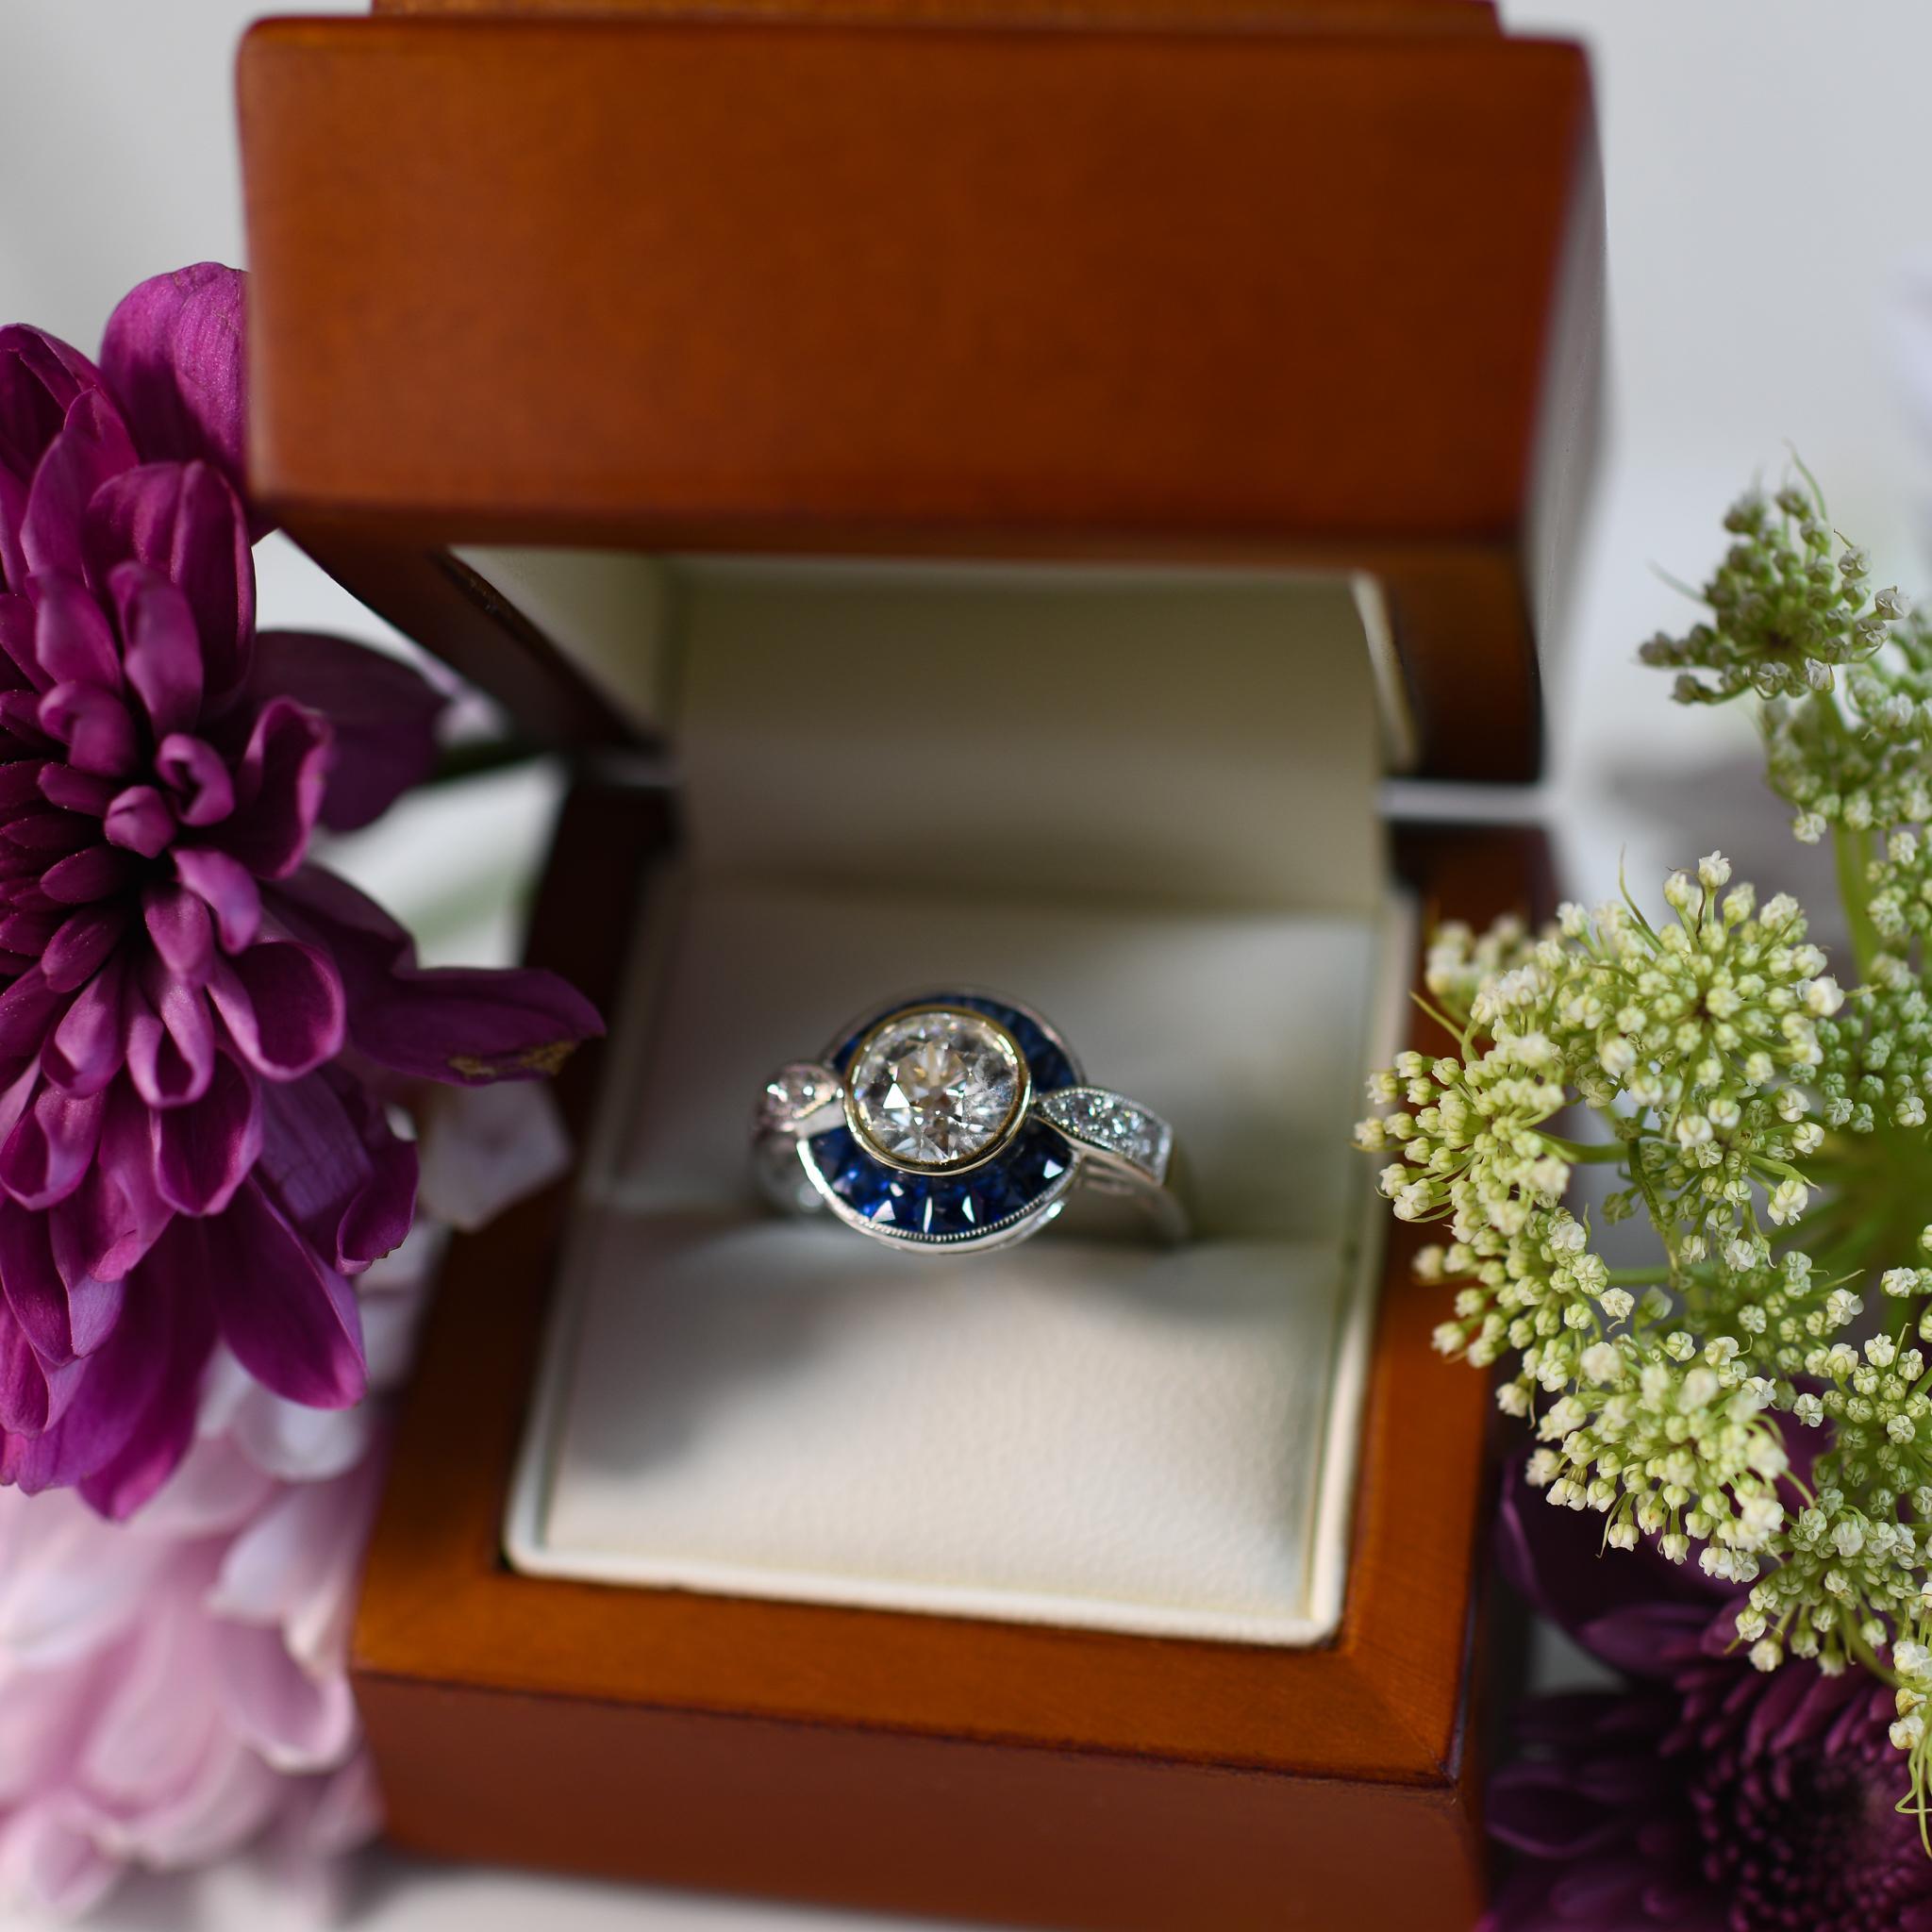 Elegance meets opulence in this stunning 18K white gold diamond sapphire halo ring, exuding timeless sophistication. The lustrous white gold setting accentuates the brilliance of the carefully selected diamonds, while a radiant yellow gold bezel